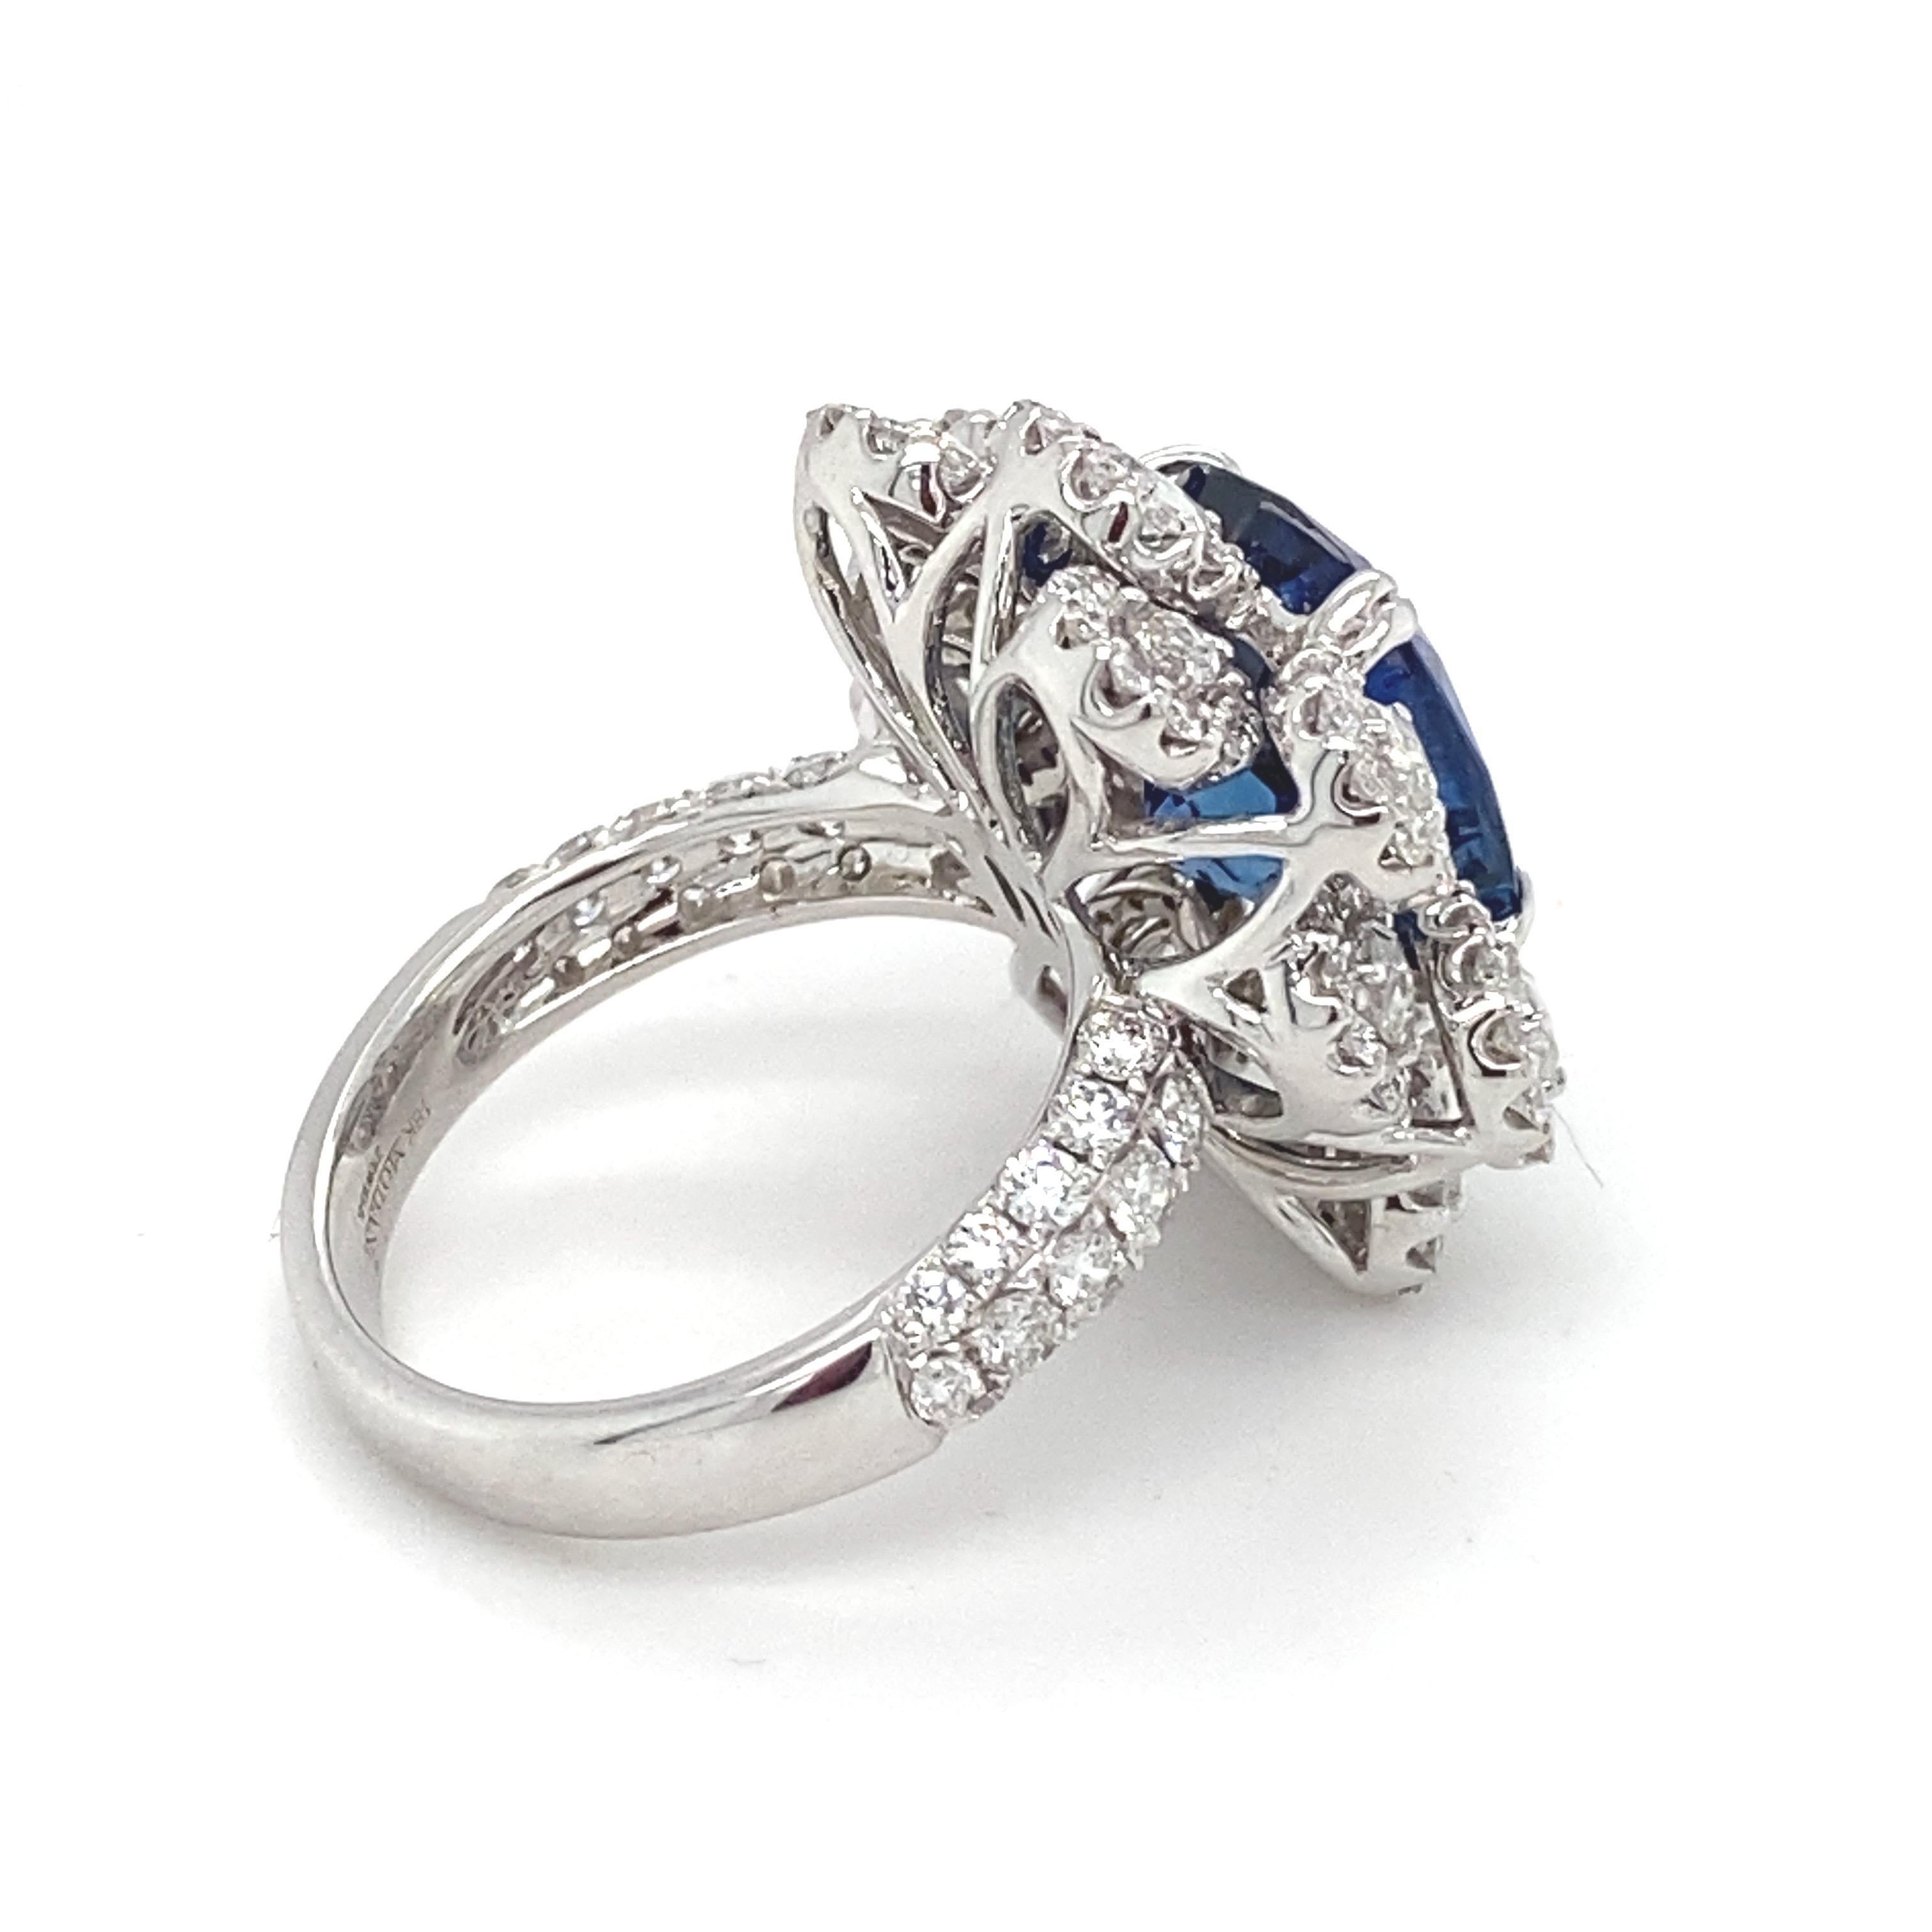 GIA Certified 7.87 Carat Cushion Shape Blue Sapphire Diamond 18K Engagement Ring For Sale 1